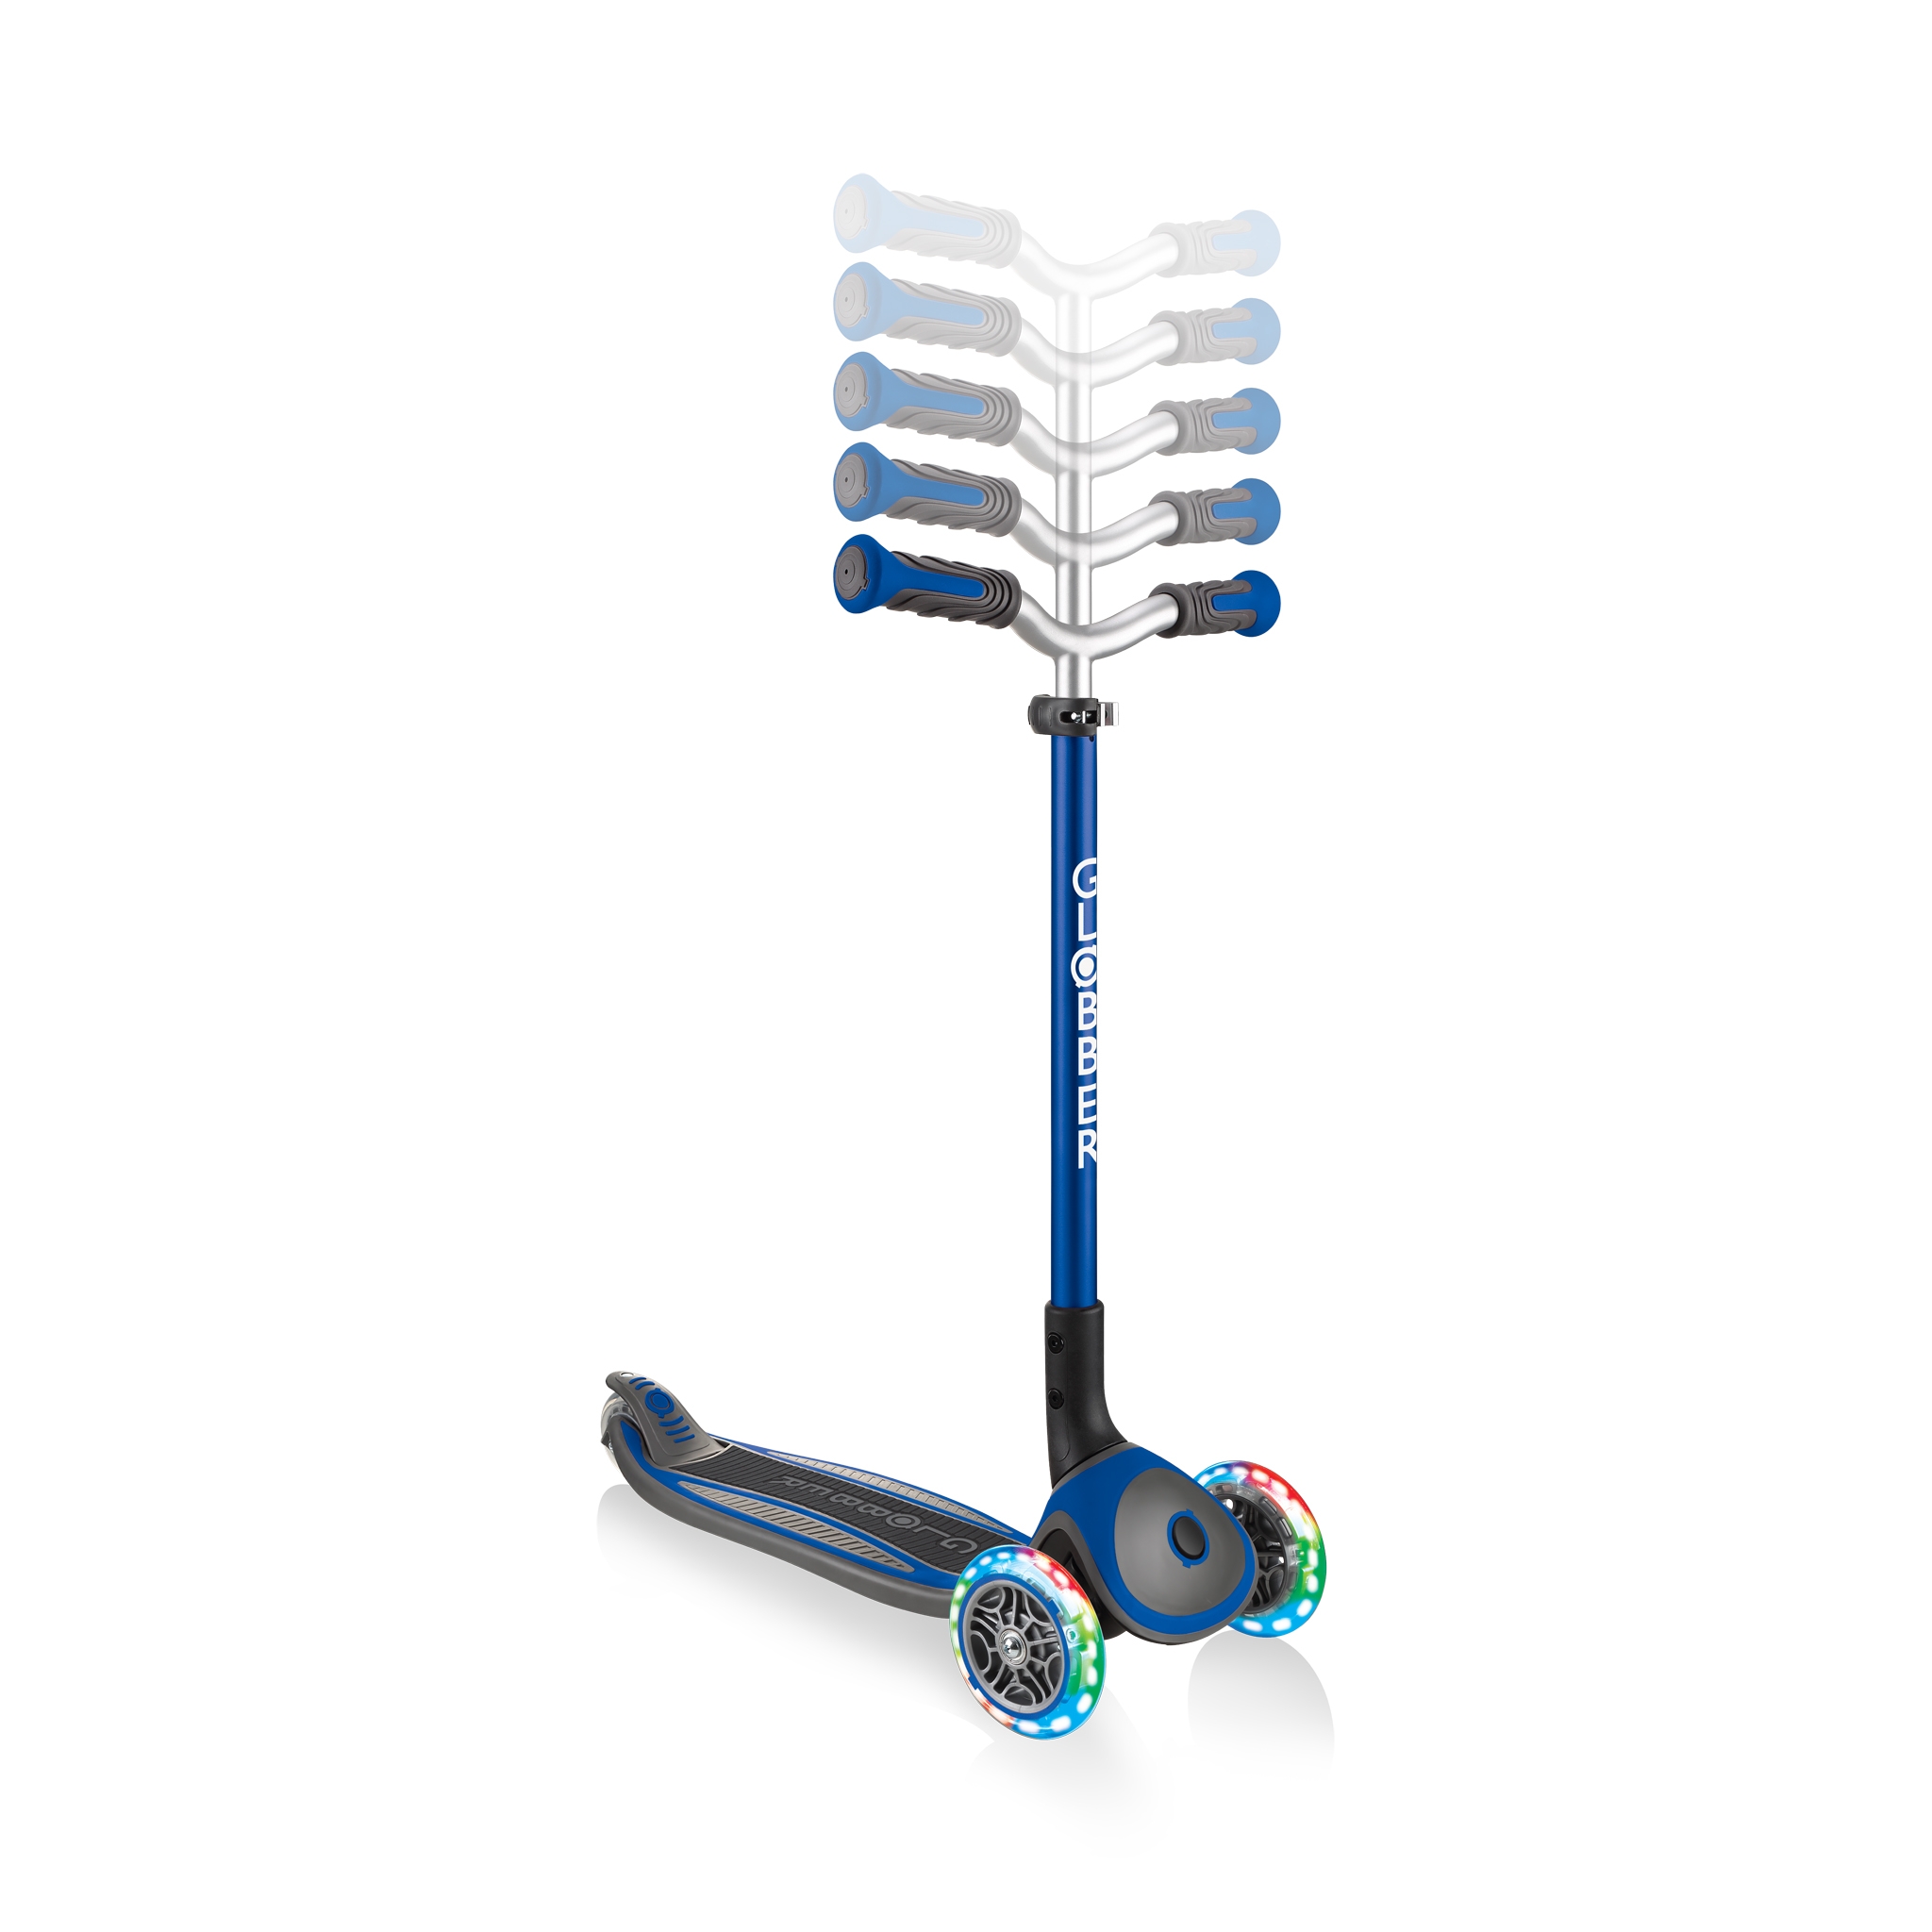 Globber-MASTER-LIGHTS-premium-3-wheel-foldable-light-up-scooters-for-kids-with-5-height-adjustable-T-bar_dark-blue 2